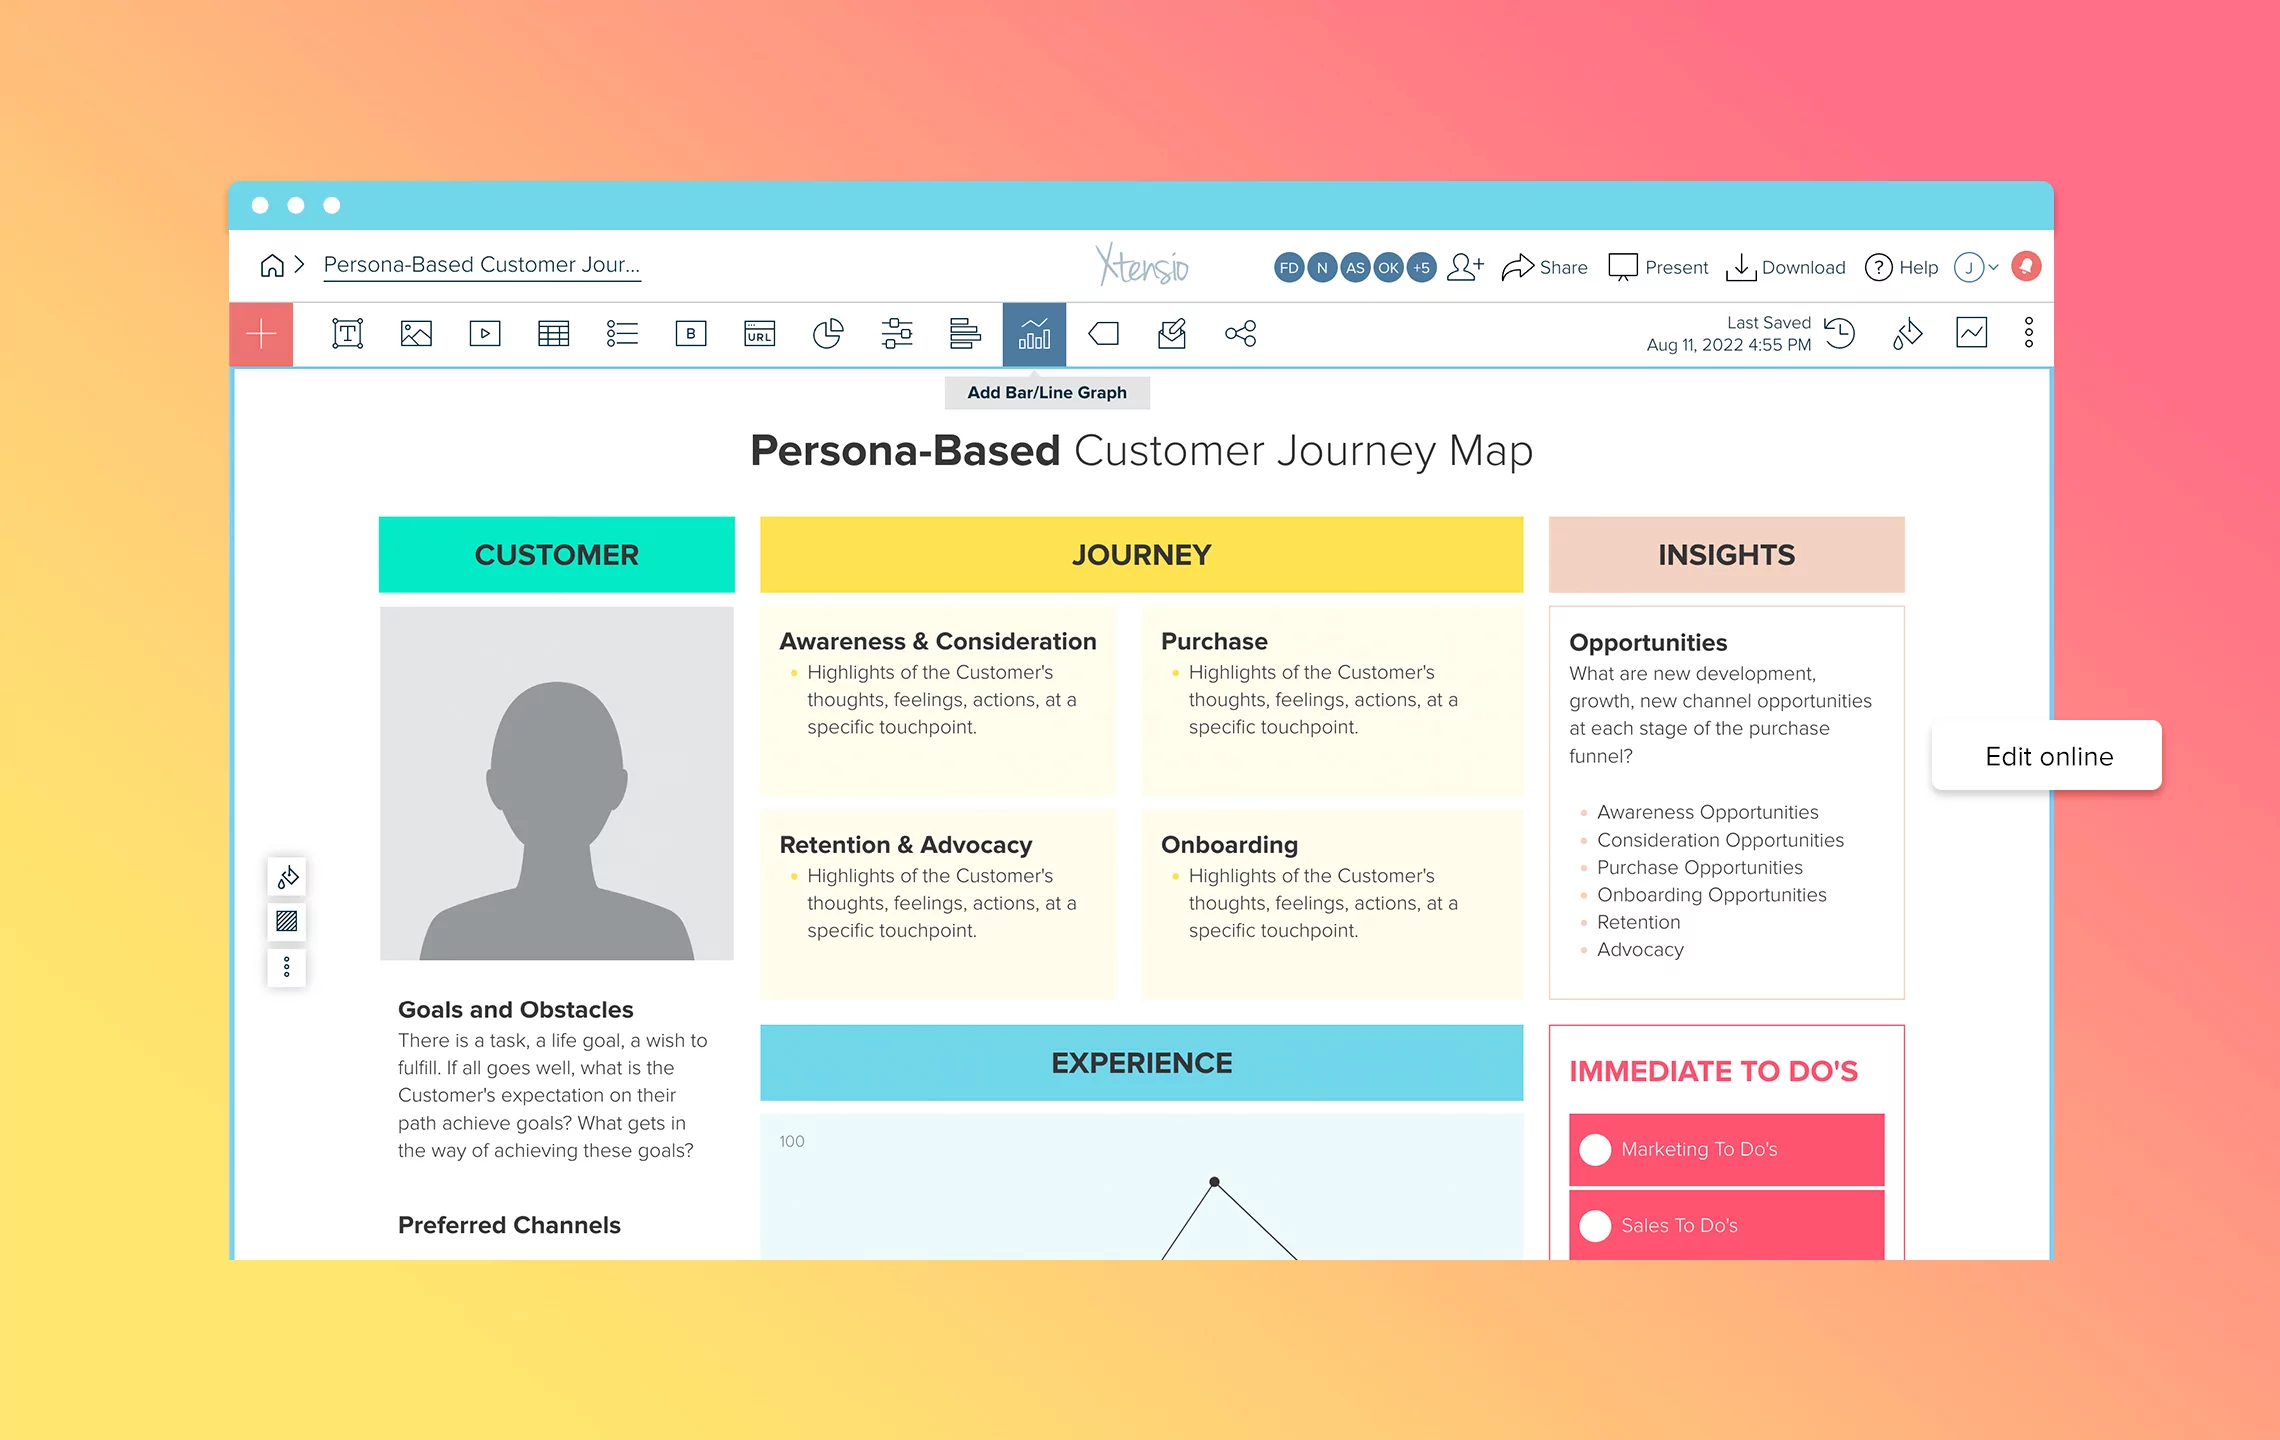 Customer Journey Map Variations: Persona-Based Customer Journey Map